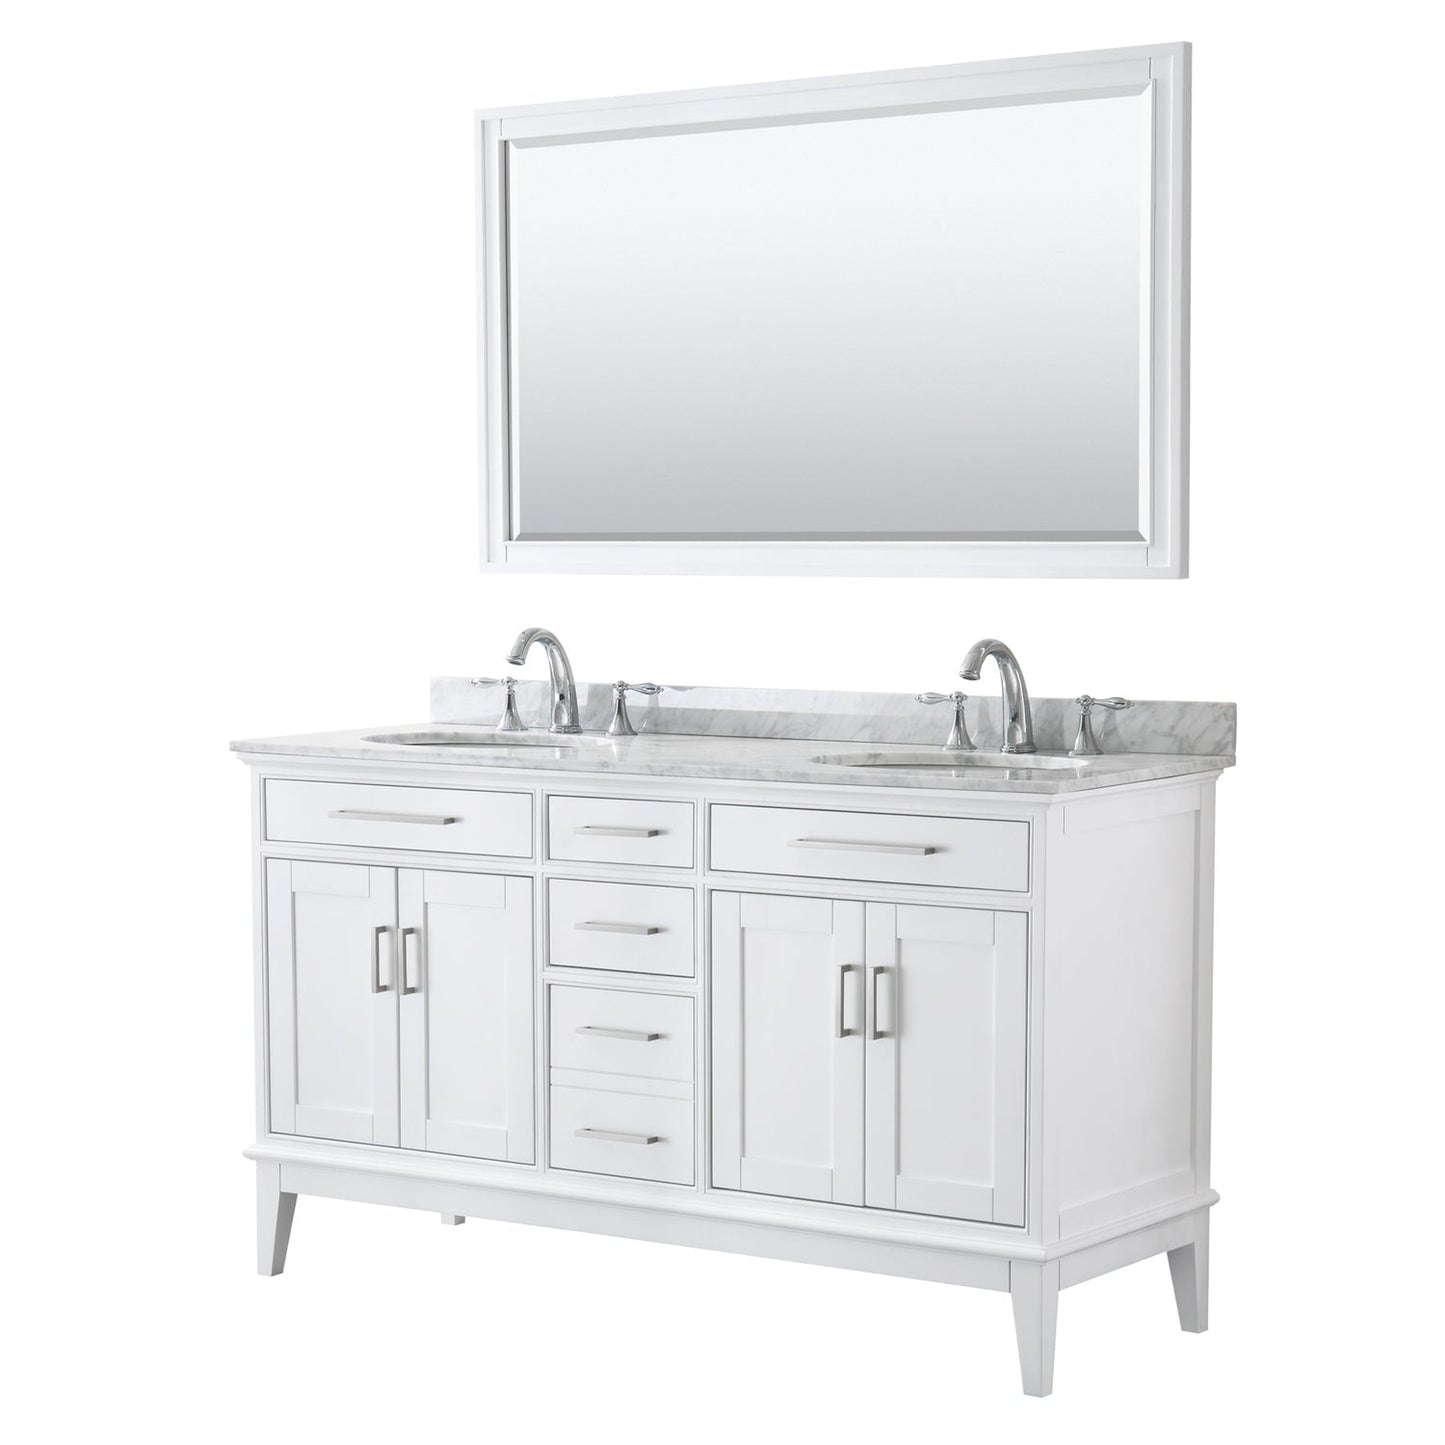 Wyndham Collection Margate 60" Double Bathroom White Vanity With White Carrara Marble Countertop, Undermount Oval Sink And 56" Mirror